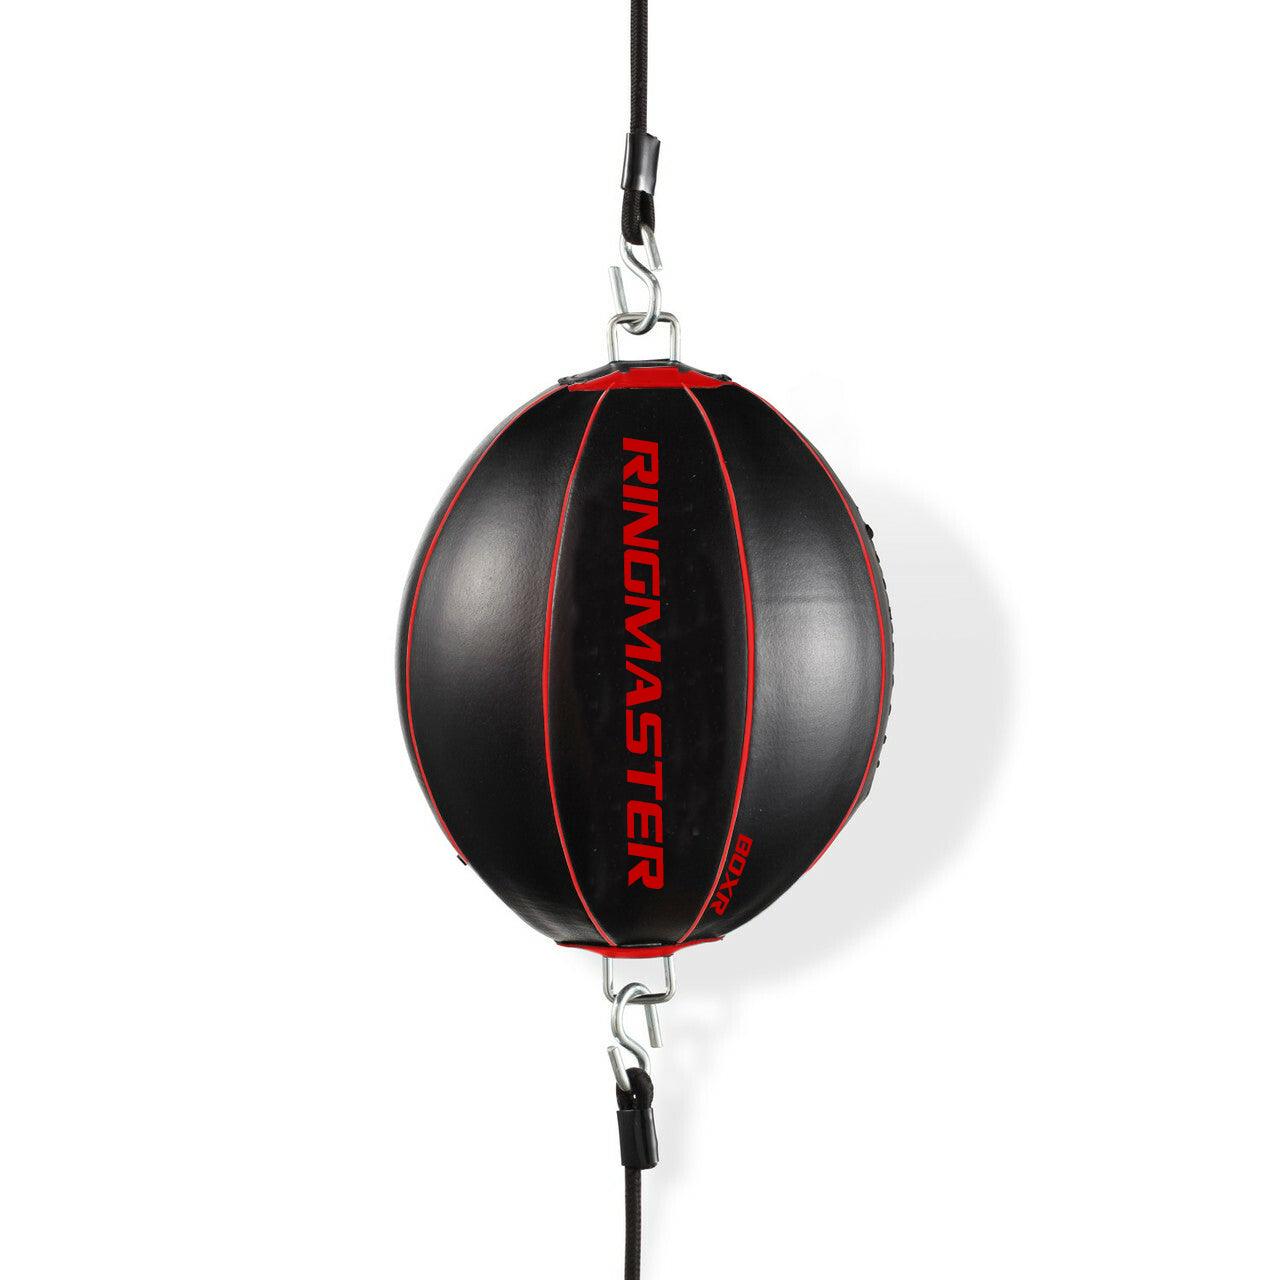 RingMaster Sports Double End Round Speed Ball BoxR Series Genuine Leather Red/Black - RINGMASTER SPORTS - Made For Champions